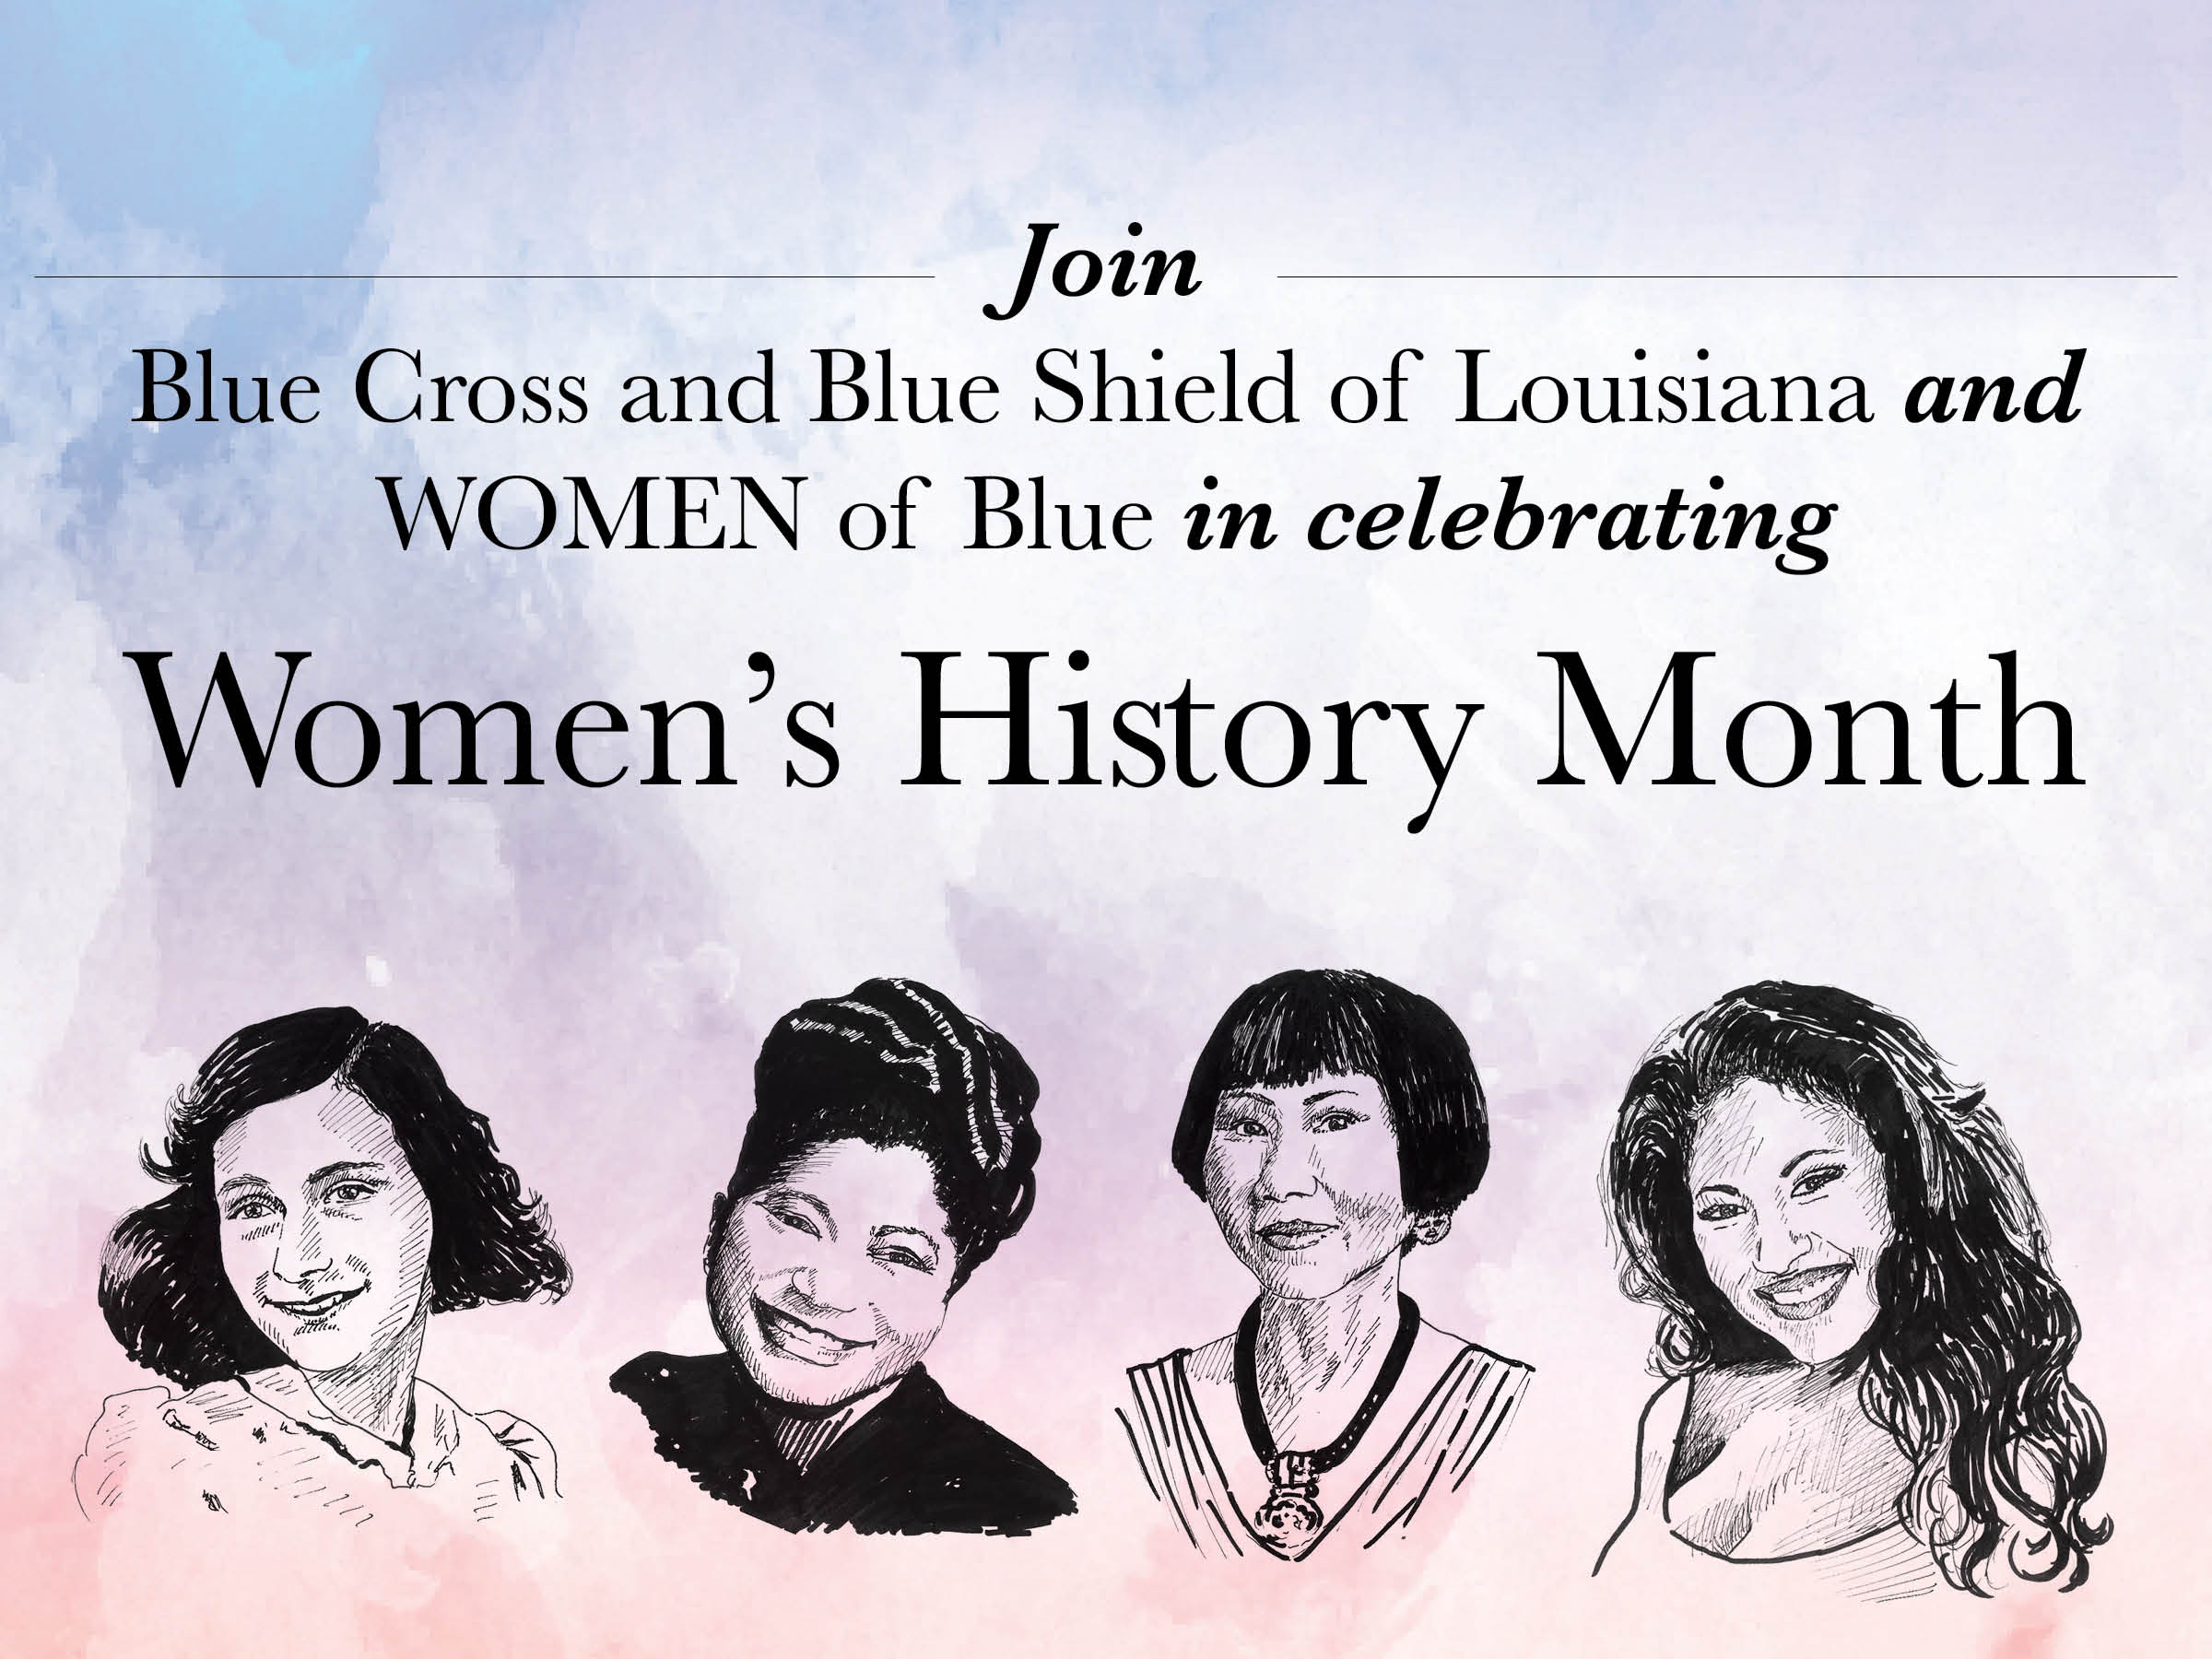 How We're Celebrating Women's History Month — Beyond Basics by MeUndies